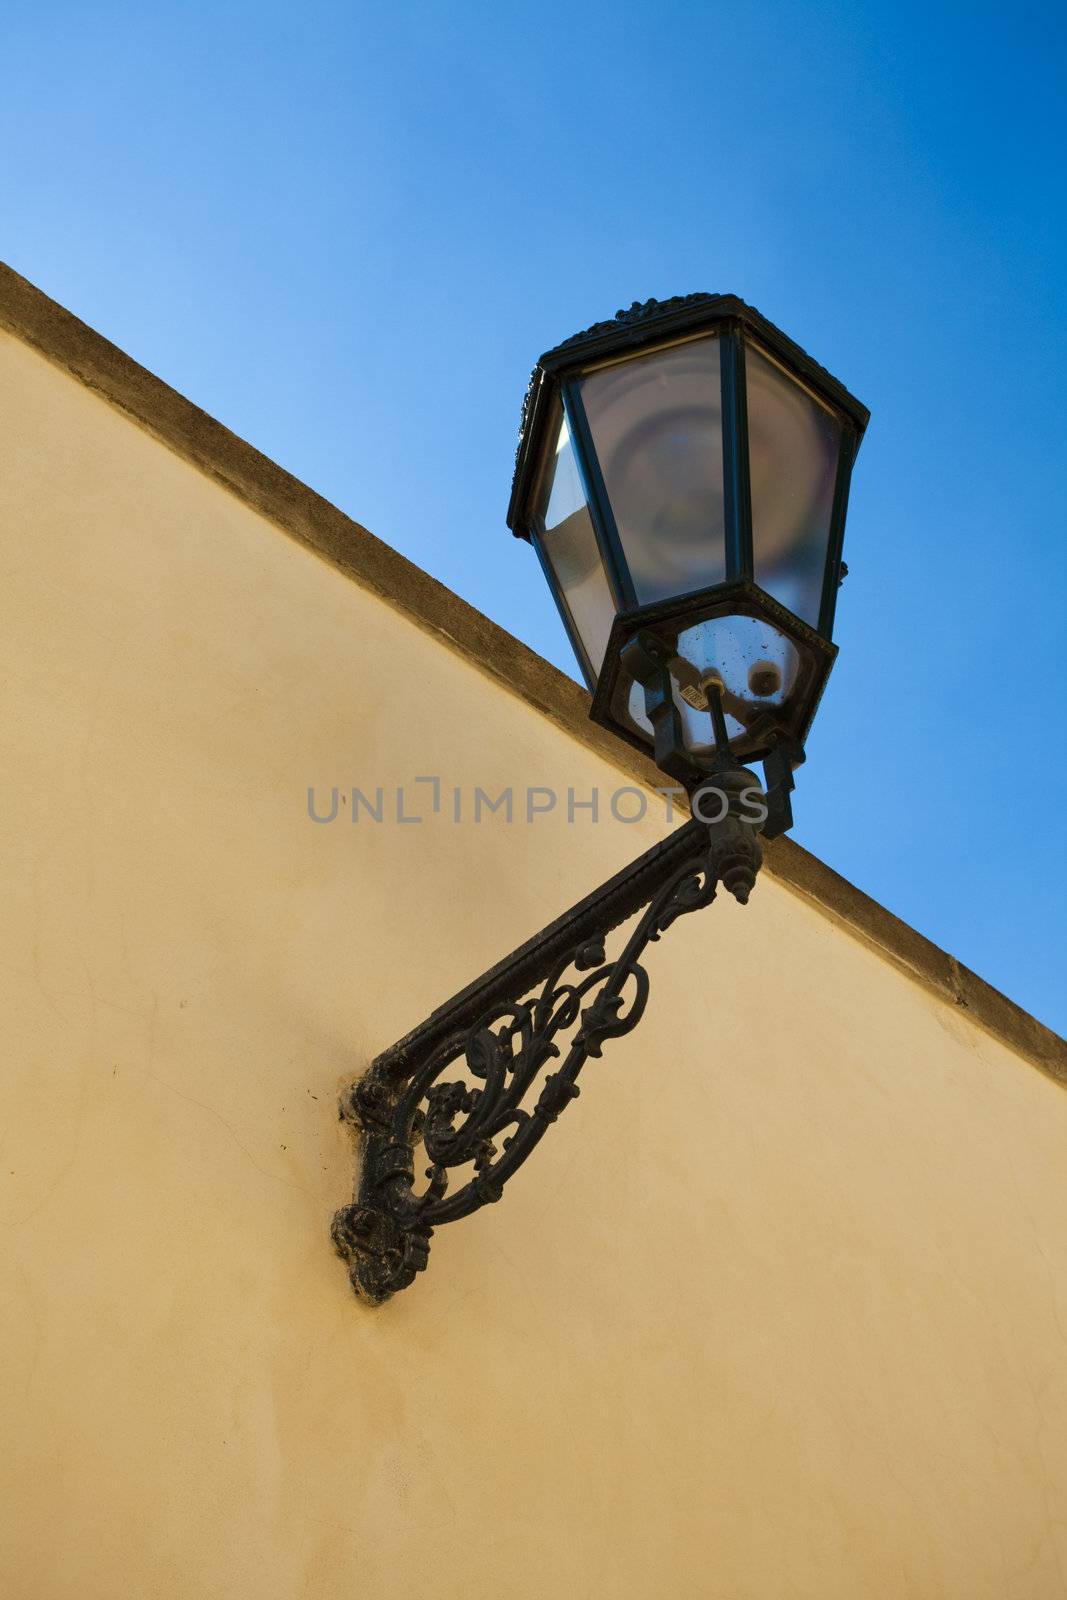 The lantern on the wall against the sky by jannyjus